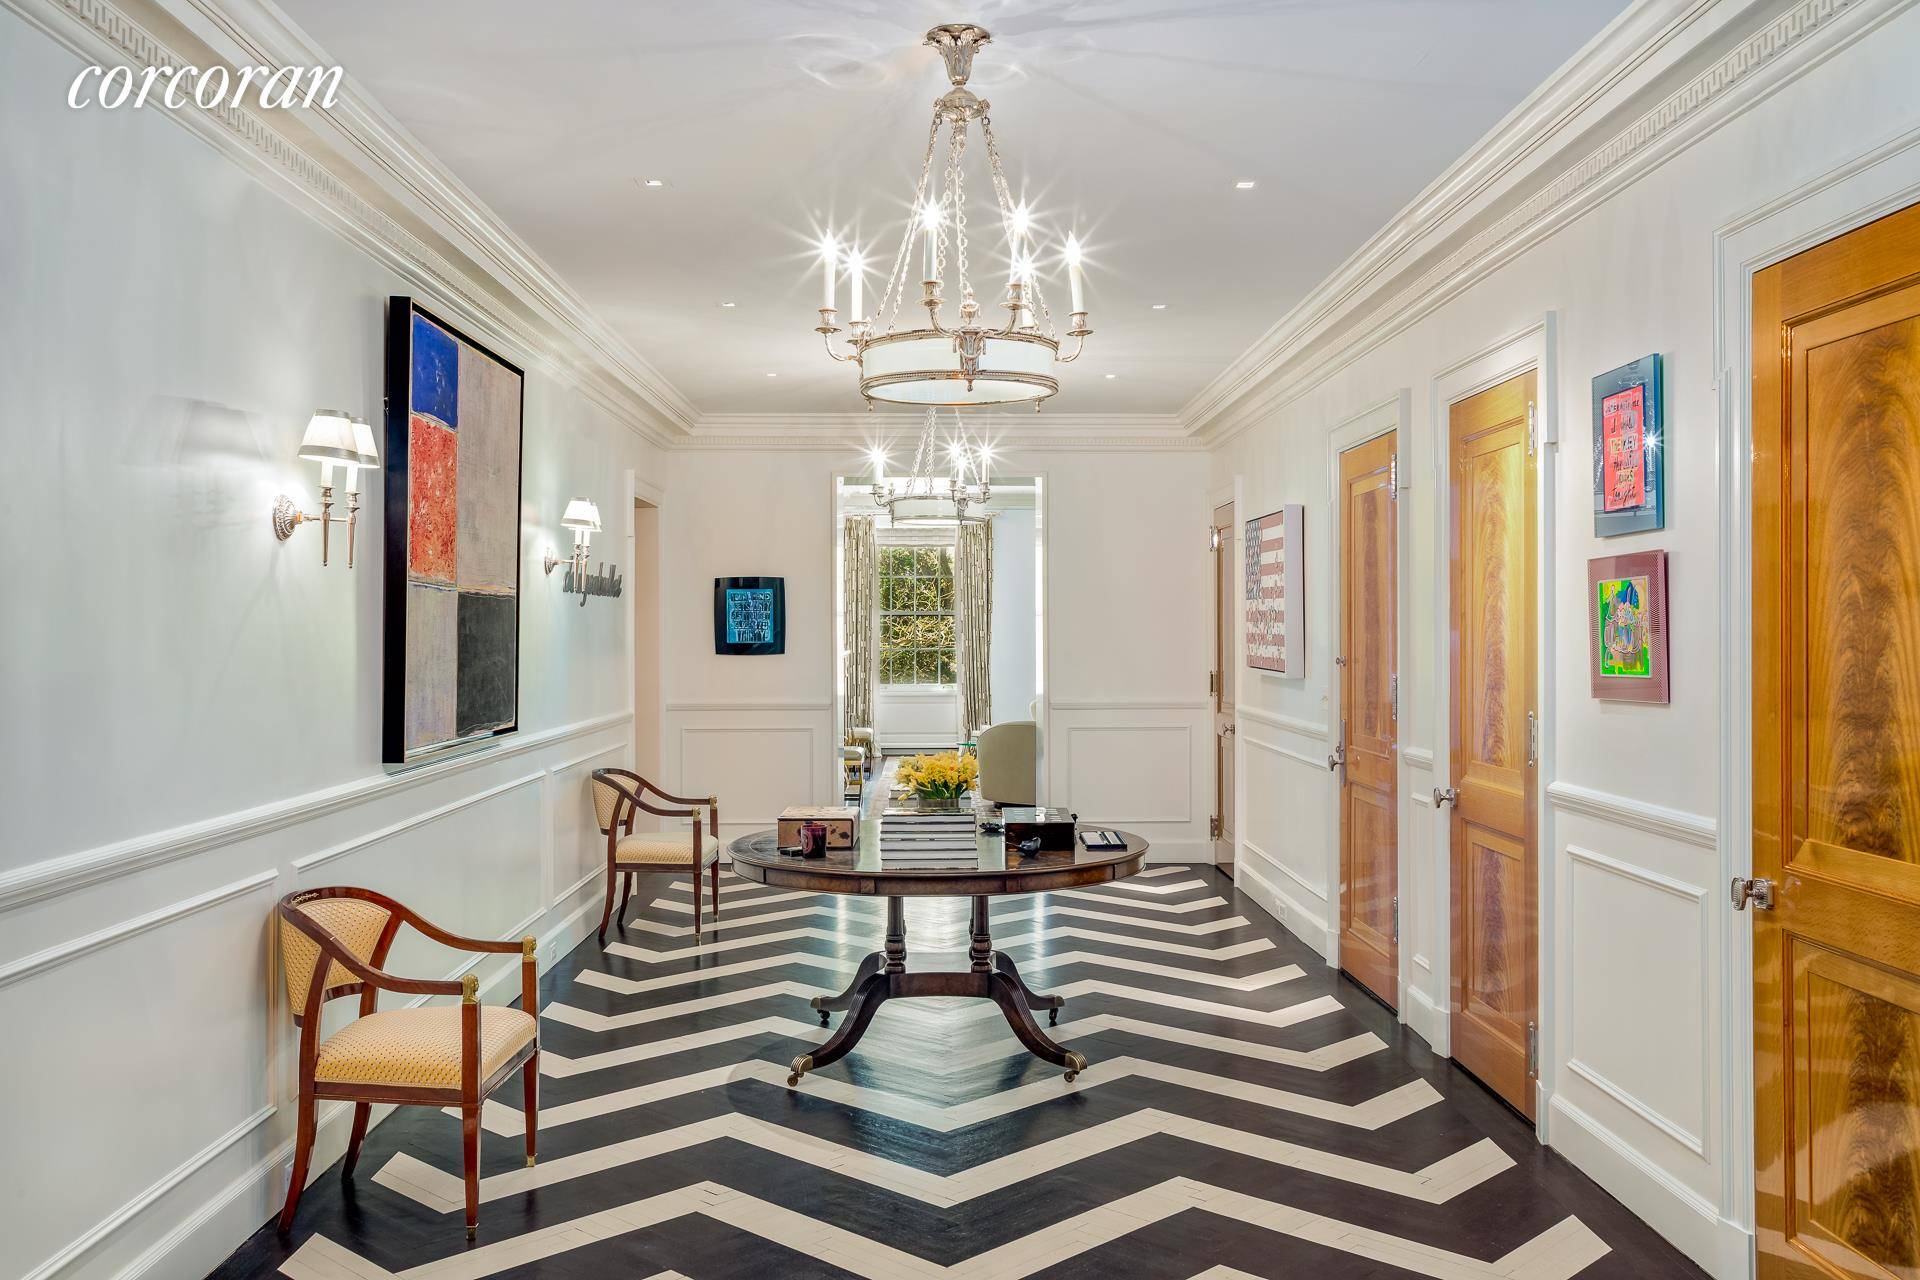 Perfectly situated on Fifth Avenue, this breathtaking prewar five bedroom, four and a half bath residence has been completely renovated by the world renowned interior designer, Tony Ingrao in conjunction ...